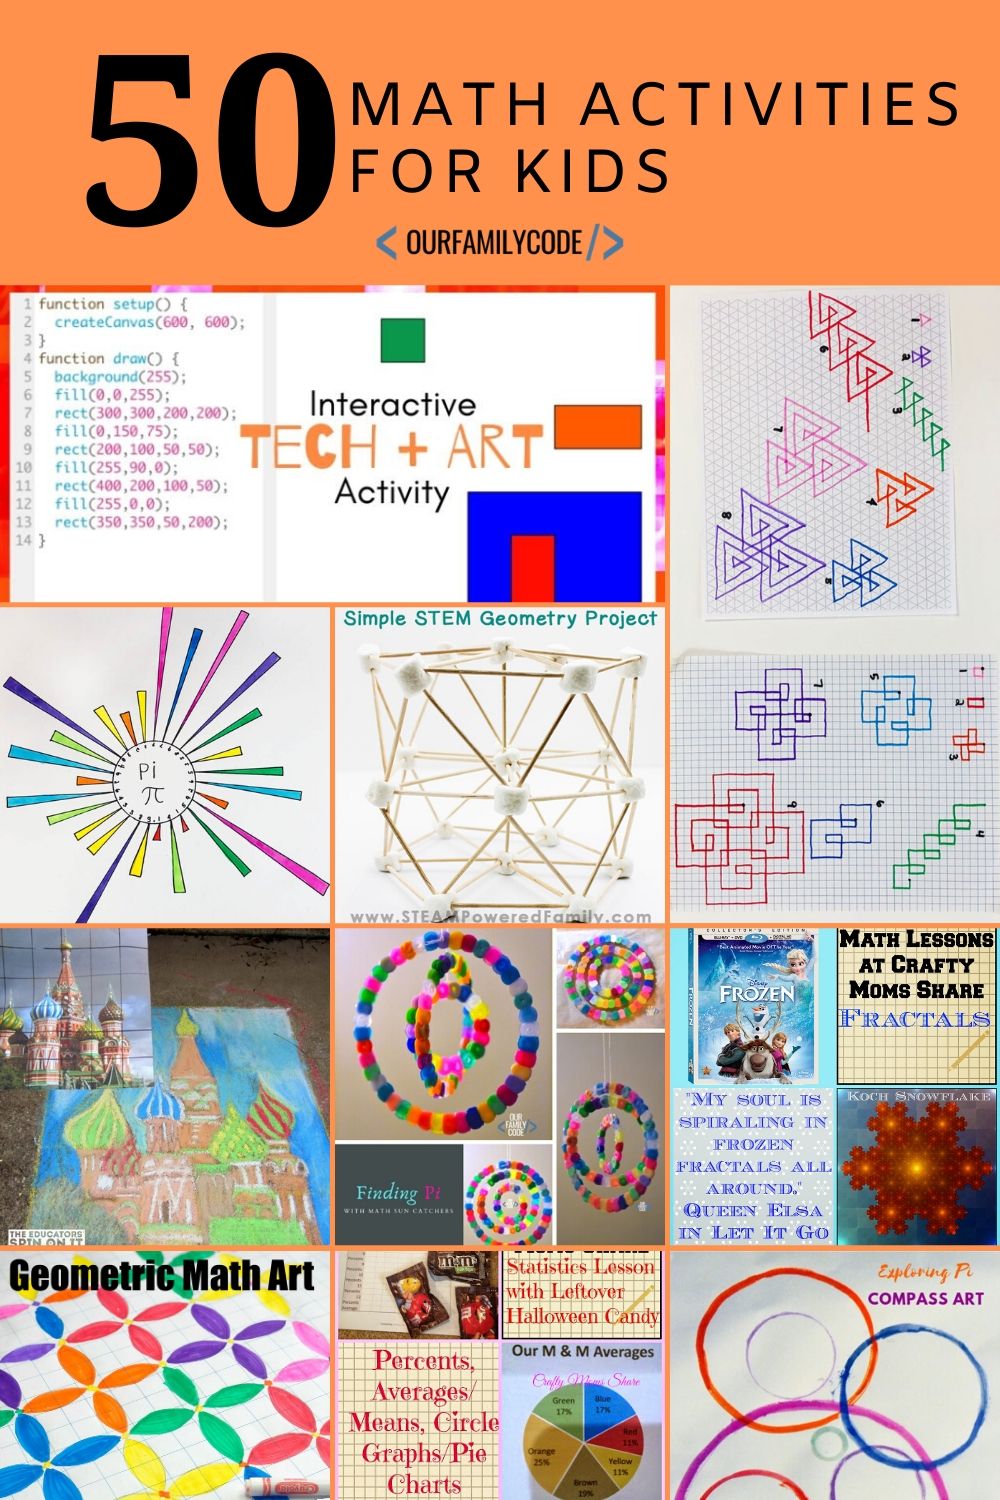 A picture of a collage of math activities for kids.